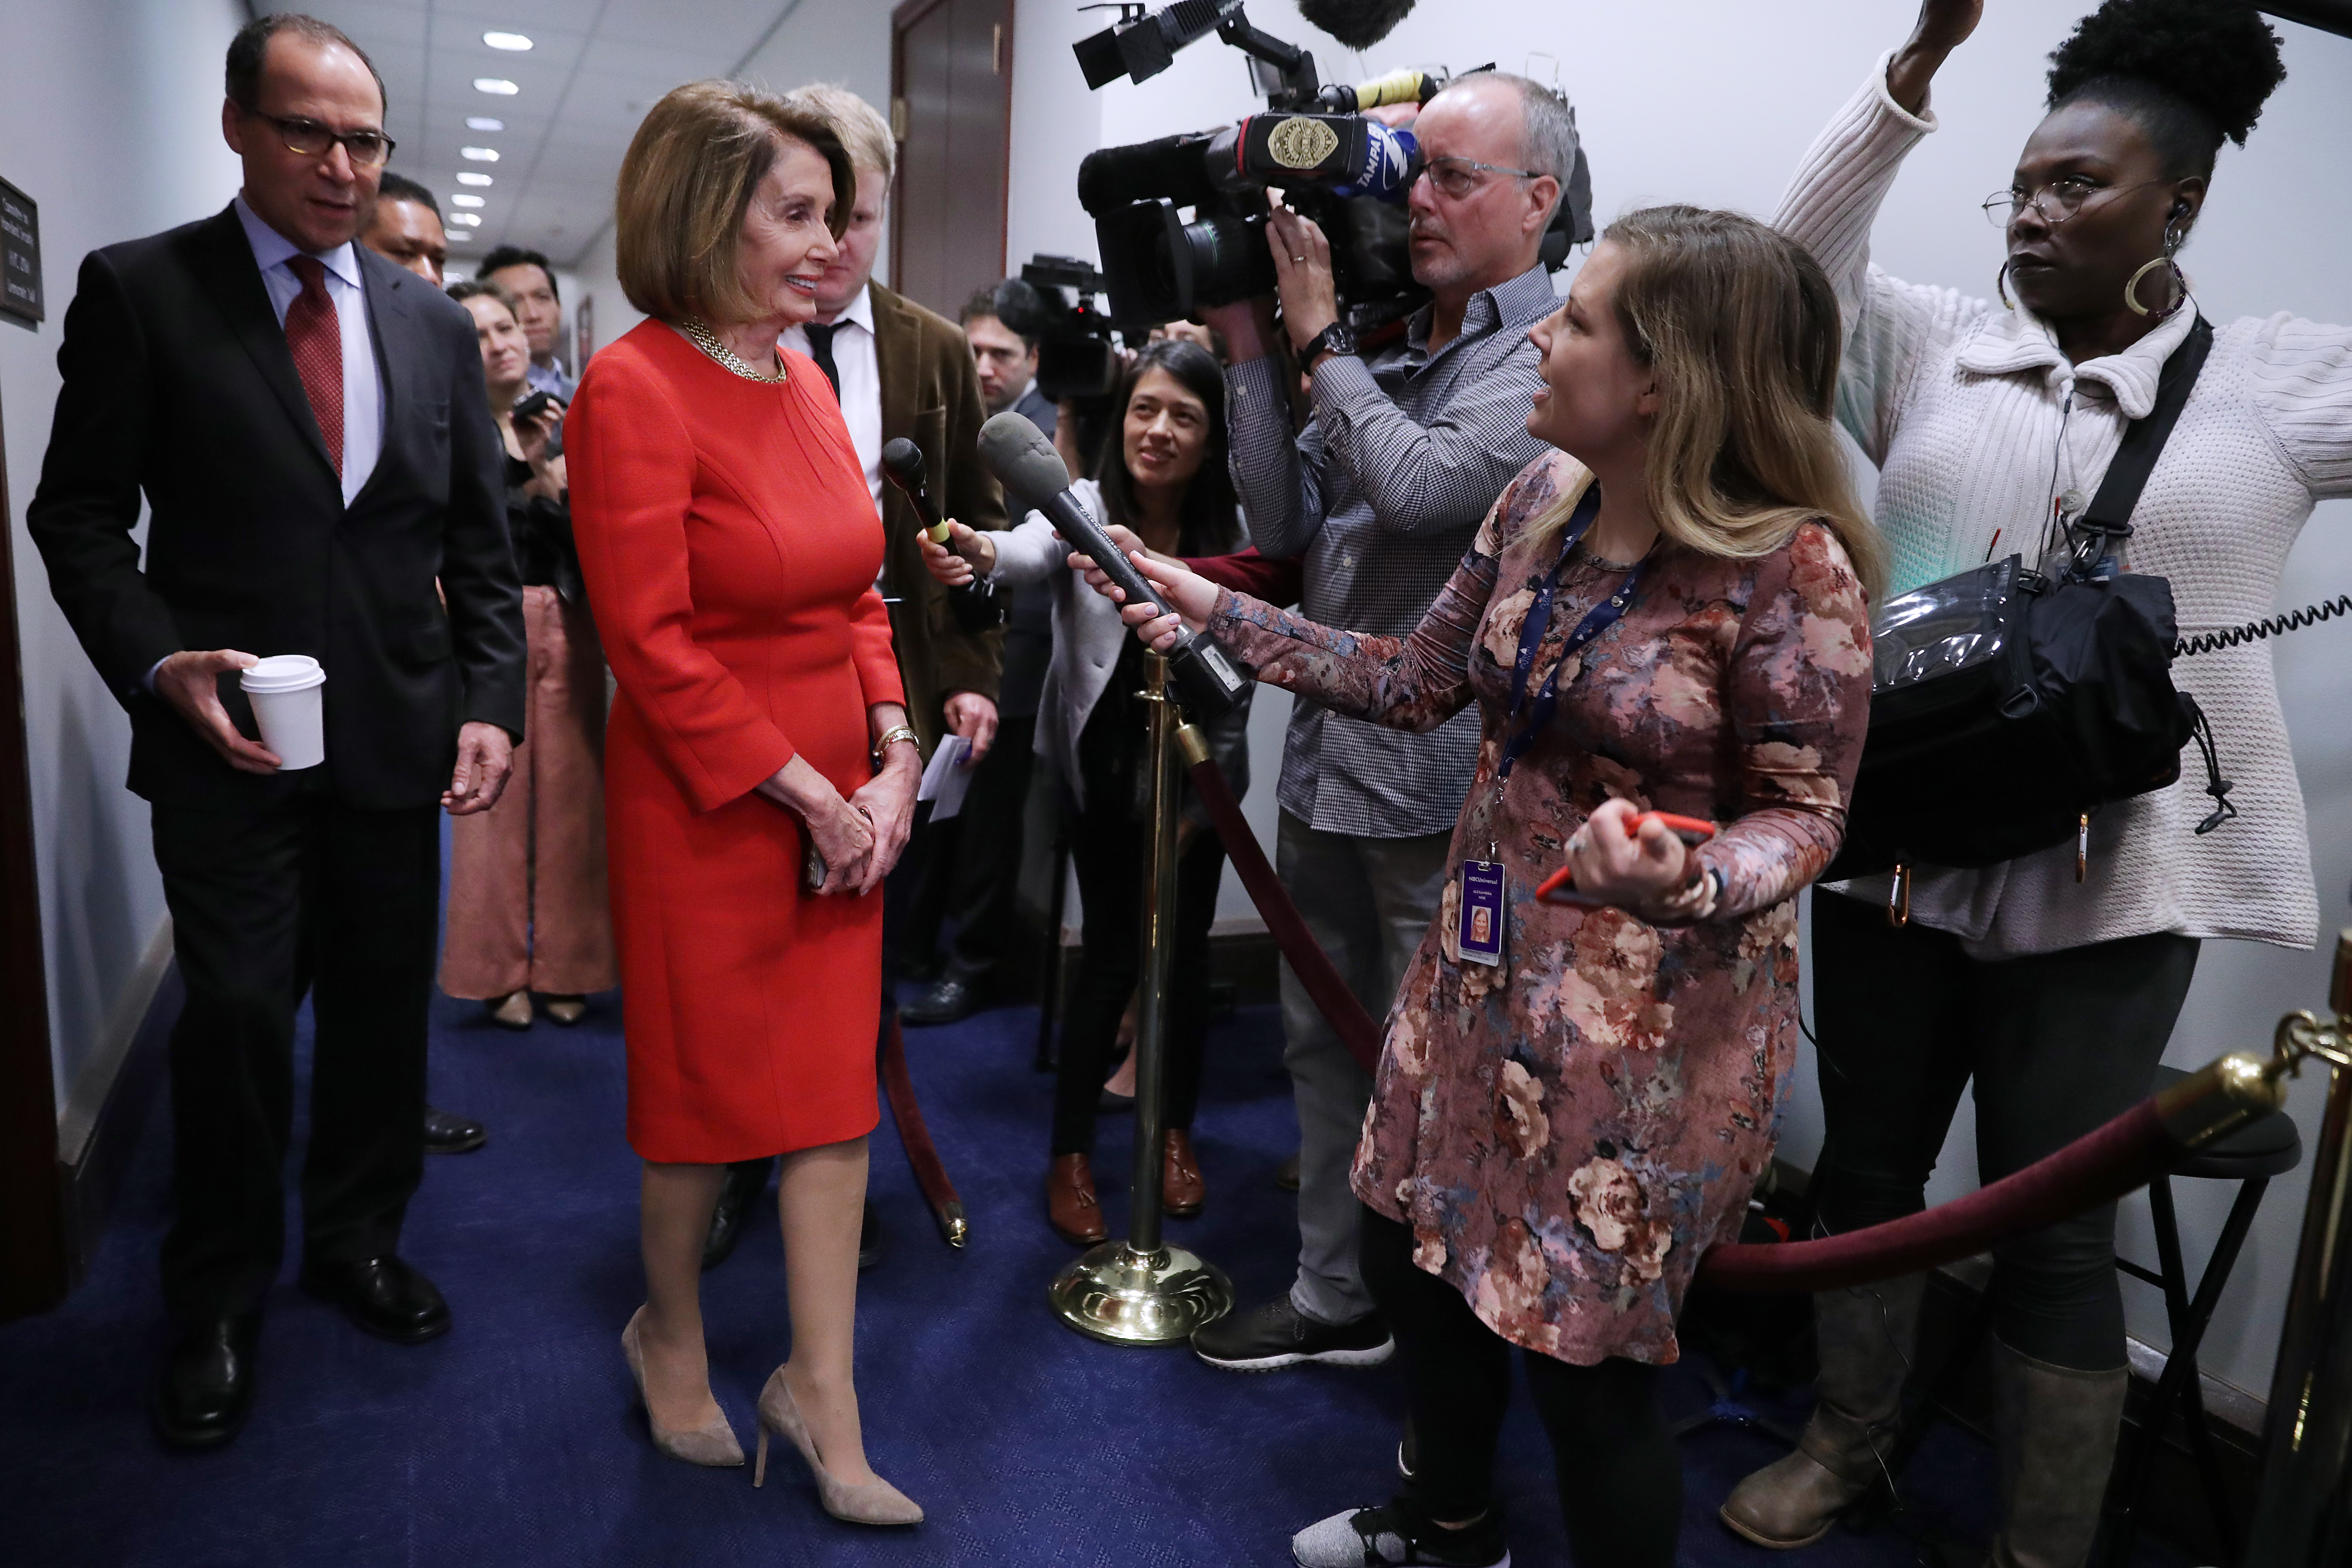 WASHINGTON, DC - NOVEMBER 14: House Minority Leader Nancy Pelosi (D-CA) talks to journalists before heading into a Democratic caucus meeting in the U.S. Capitol Visitors Center November 14, 2018 in Washington, DC. Democrats gained 33 seats in the House of Representatives in the midterm elections so far and appear on track to gain between 35 and 40 once all the counting is complete, putting them in control of the chamber in 2019. (Photo by Chip Somodevilla/Getty Images)